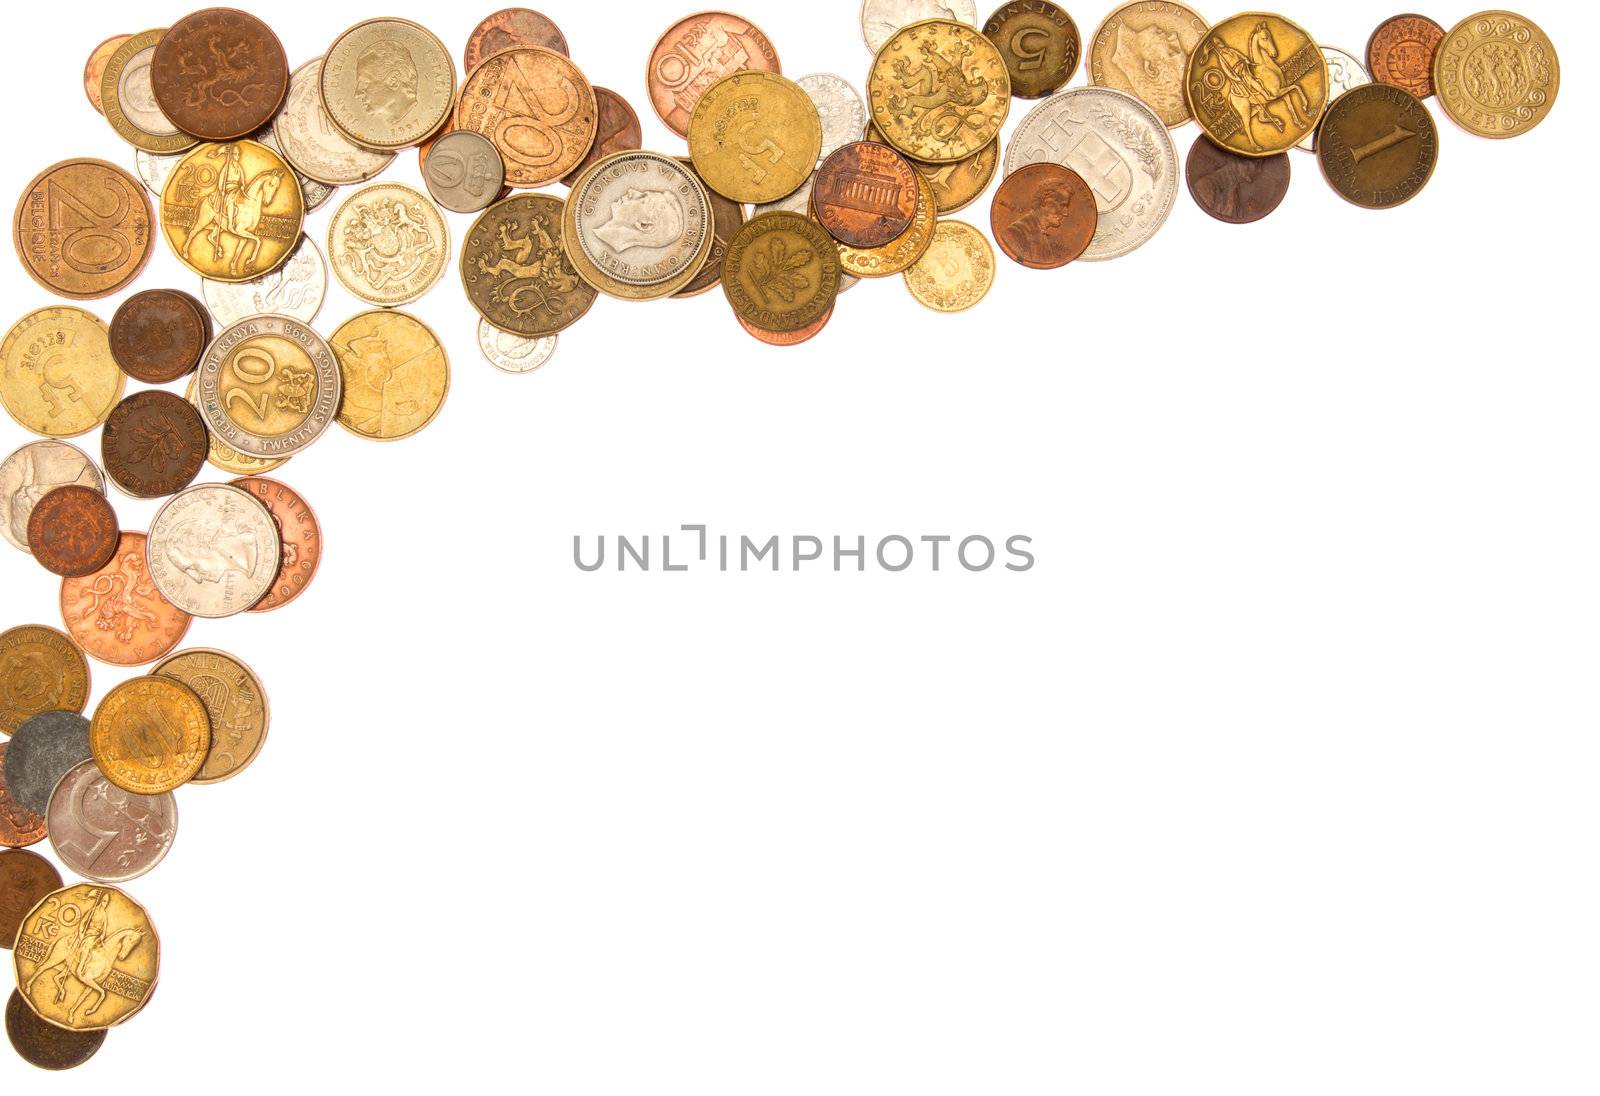 Coins by tonlammerts